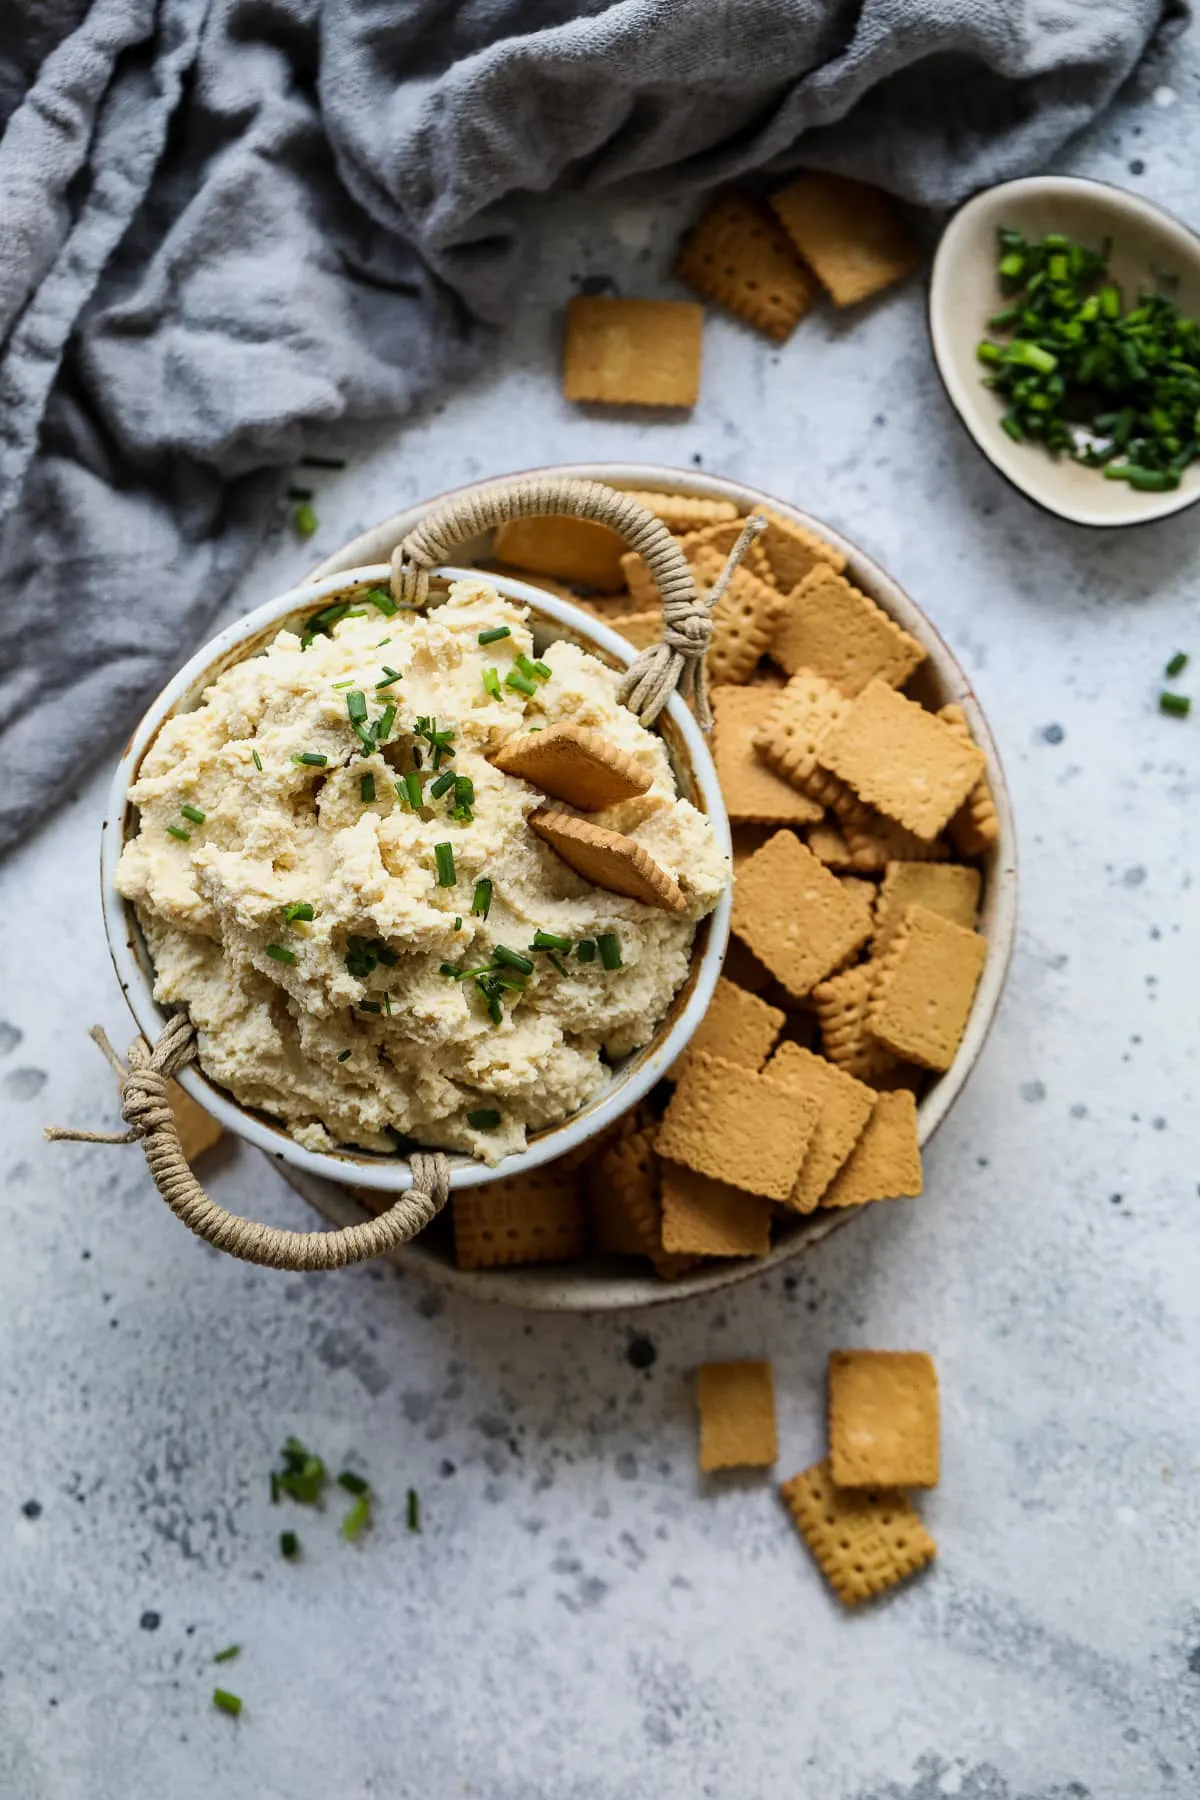 Dairy-free ricotta in a bowl with crackers and chives.